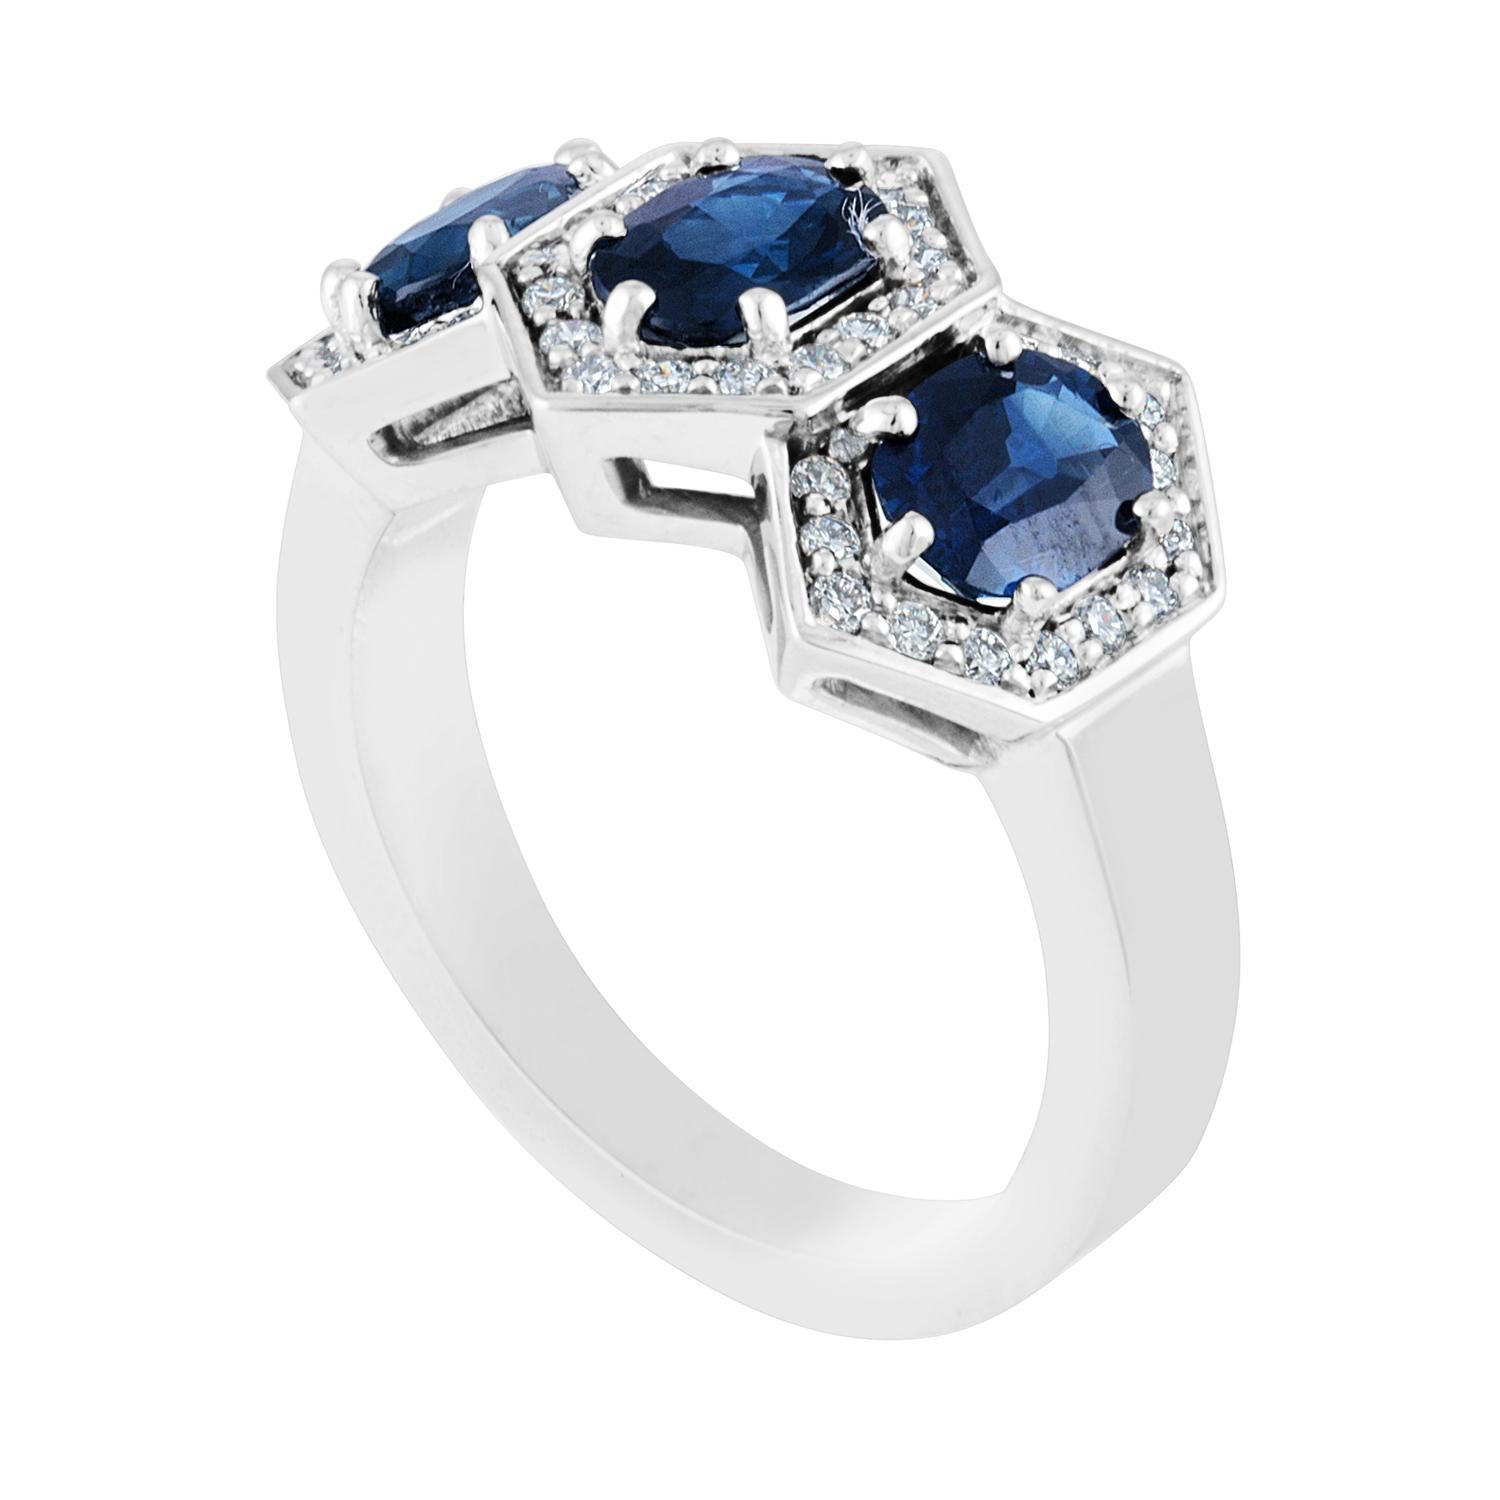 Three Stone Hexagon Band Ring
The ring is 14K White Gold
The ring has 3 Oval Sapphires 2.22 Carats
The ring has 0.30 Carats Diamonds F/G VS
The ring is a size 6.75, sizable.
The ring weighs 6.4 grams